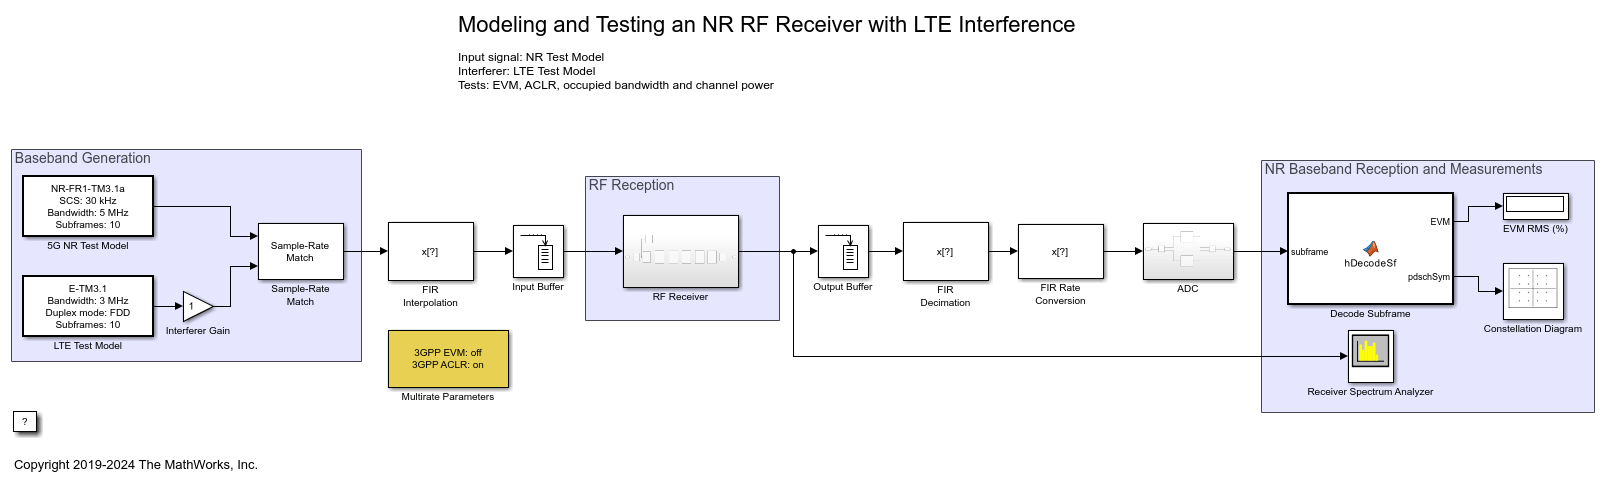 Modeling and Testing an NR RF Receiver with LTE Interference